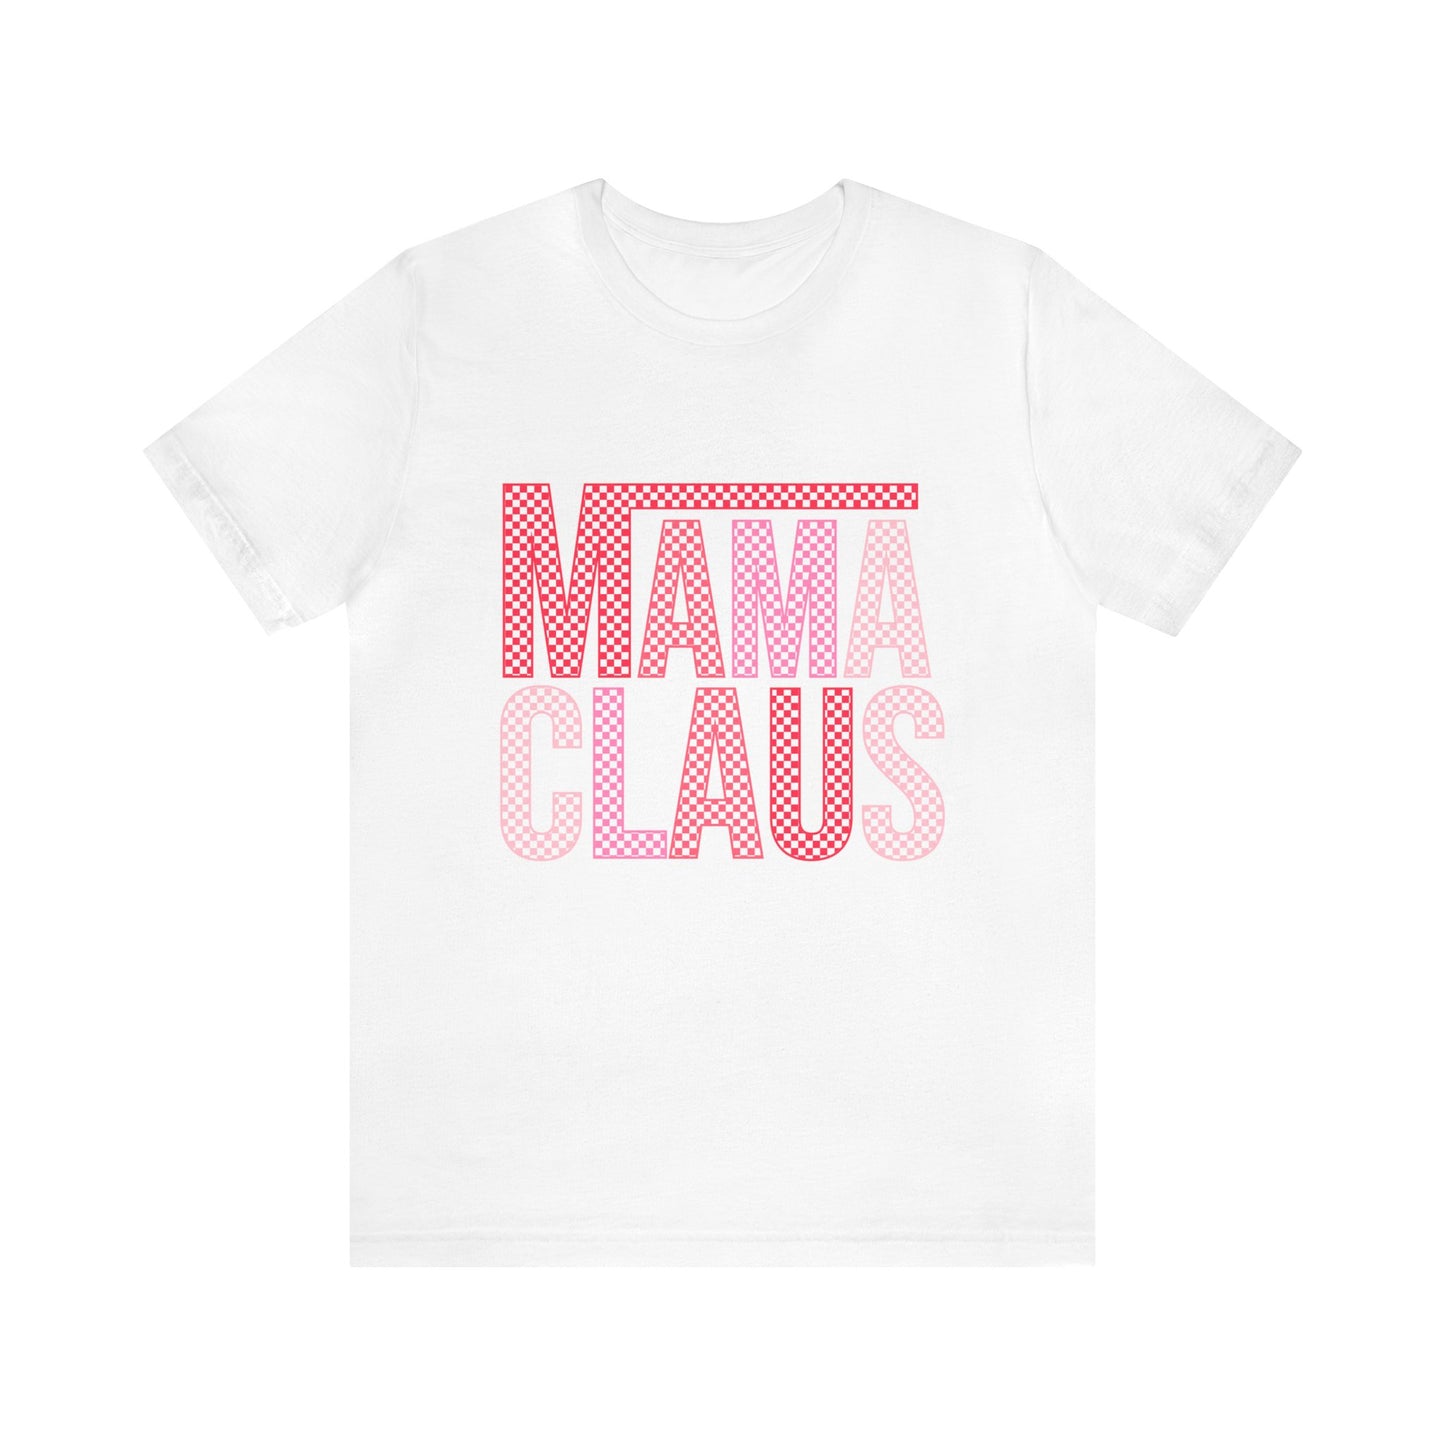 Checkered Mama Claus Christmas Comfort Colors Short Sleeve Tee